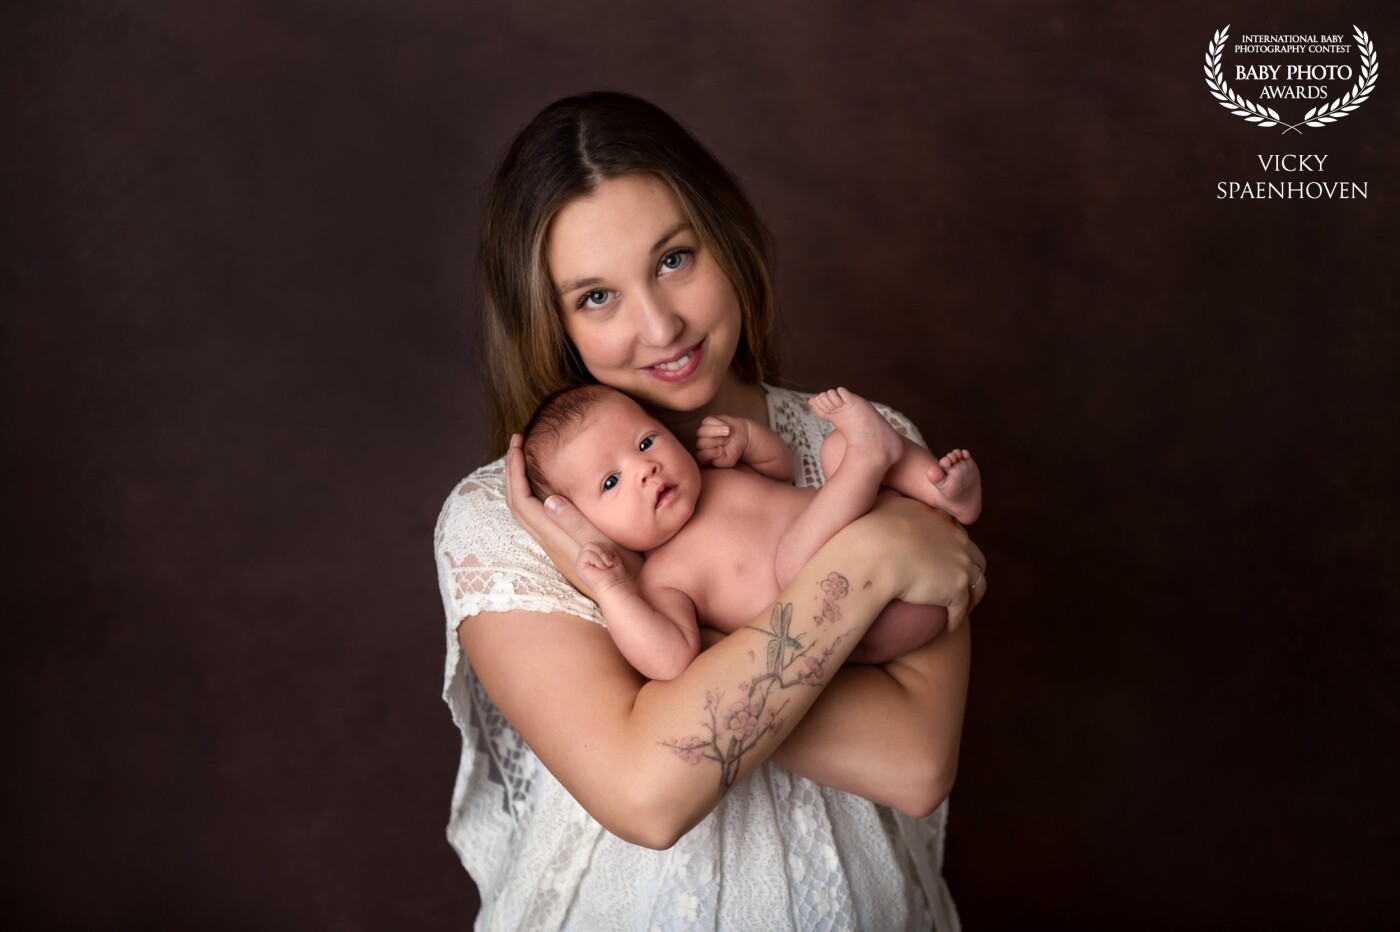 Beautiful mom and babygirl. Really love their natural expression. Simple and pure. Unconditional love ❤️<br />
I used a big softbox to create soft, beautiful light.